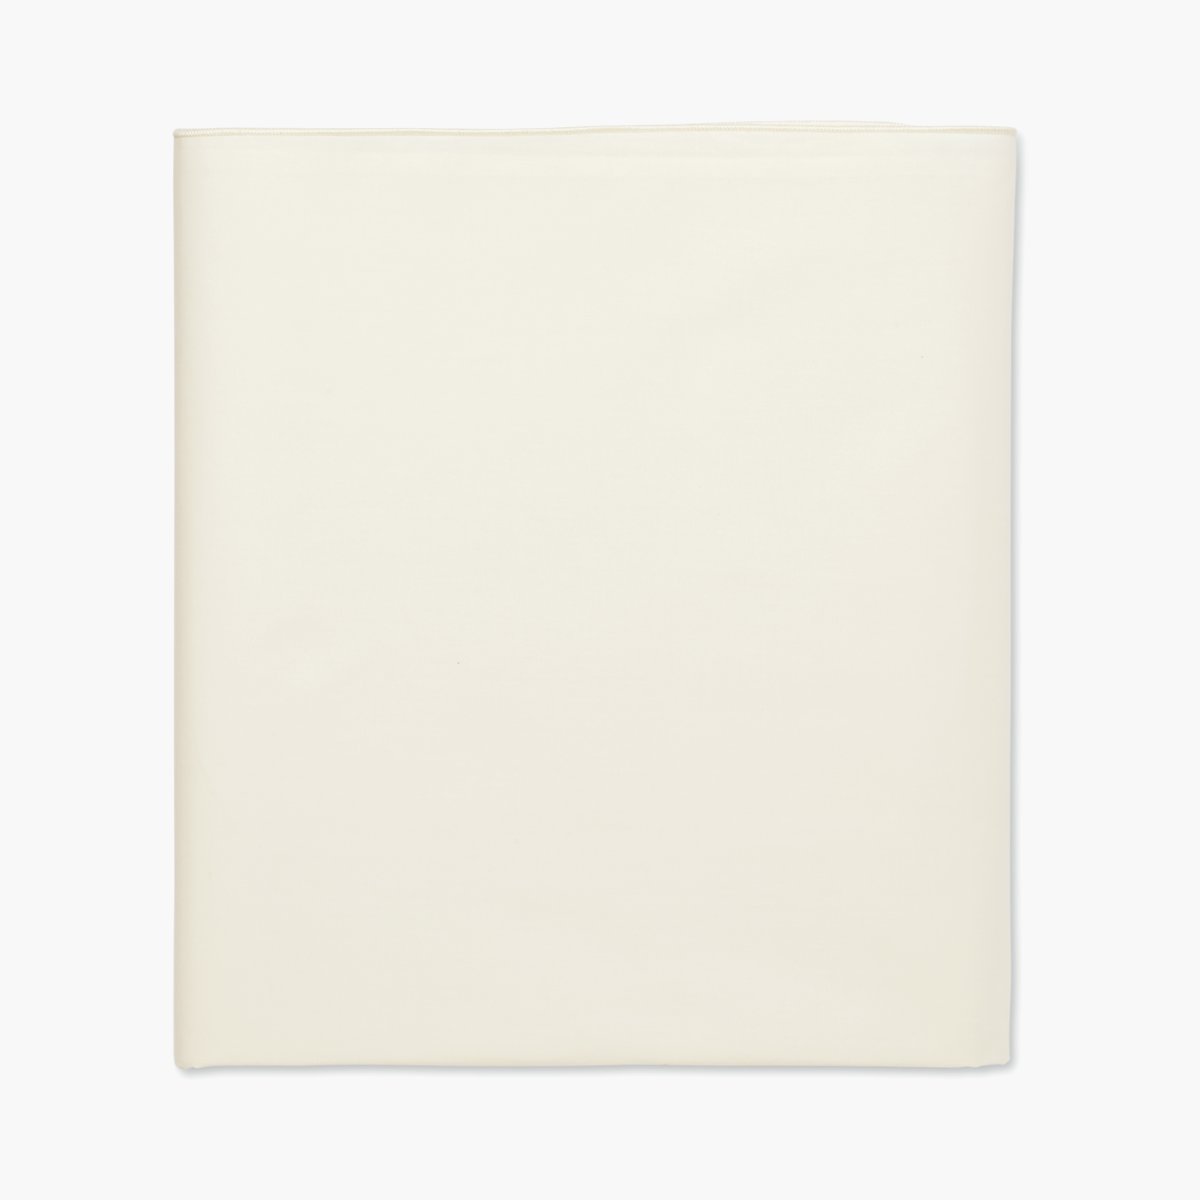 DWR Flat Sheet - Percale Outlet